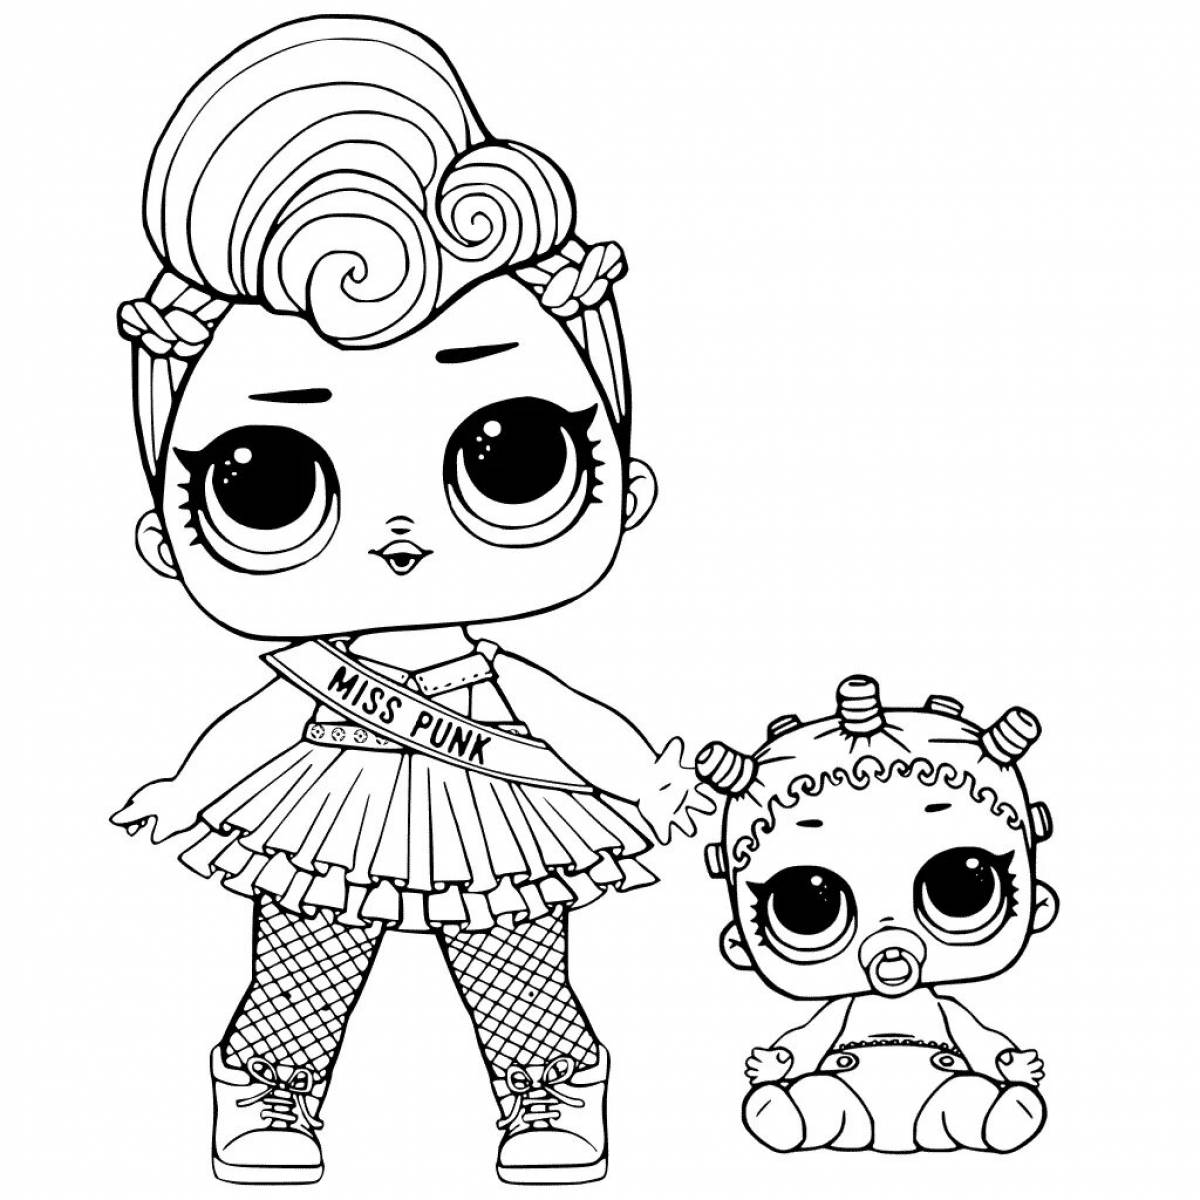 Gorgeous Lola doll coloring book for 3-4 year olds